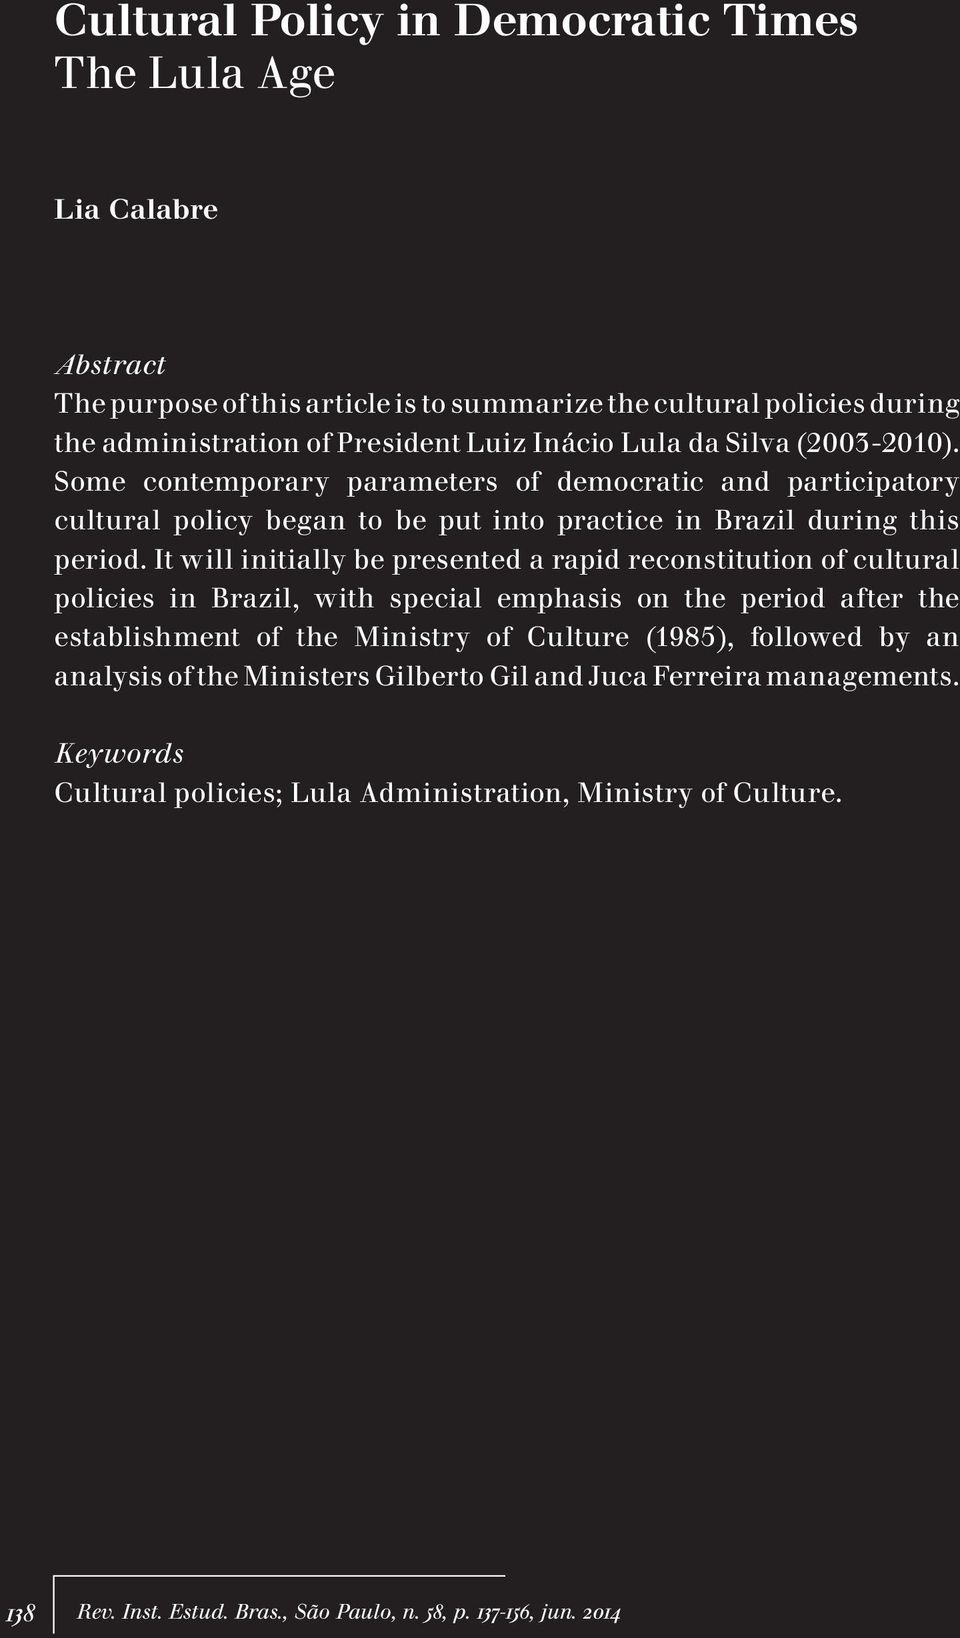 It will initially be presented a rapid reconstitution of cultural policies in Brazil, with special emphasis on the period after the establishment of the Ministry of Culture (1985),